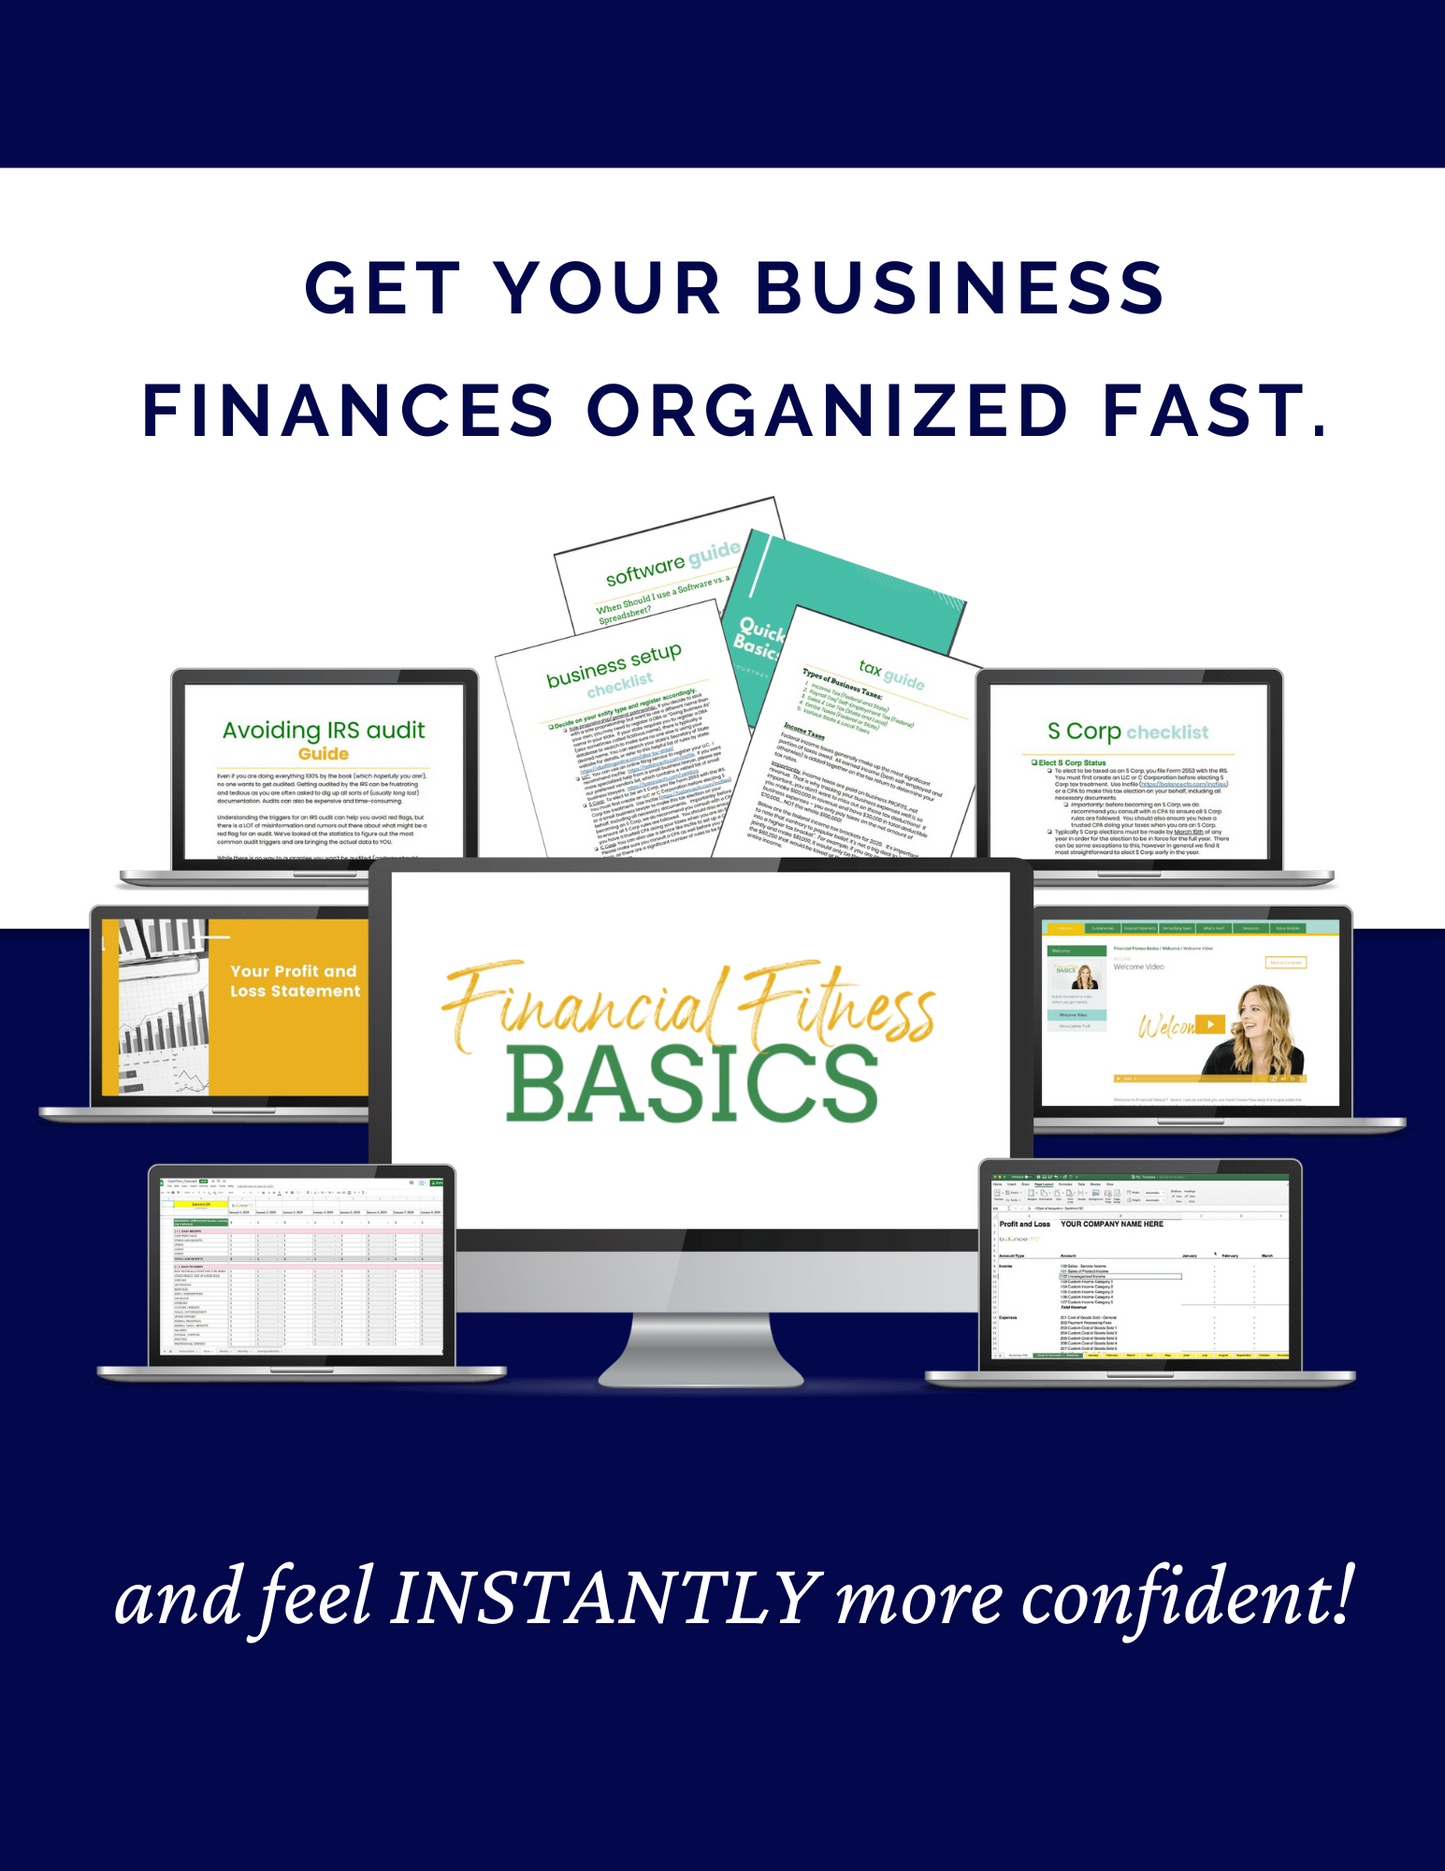 Improve your business's financial performance and get your business finances organized fast with Financial Fitness basics.